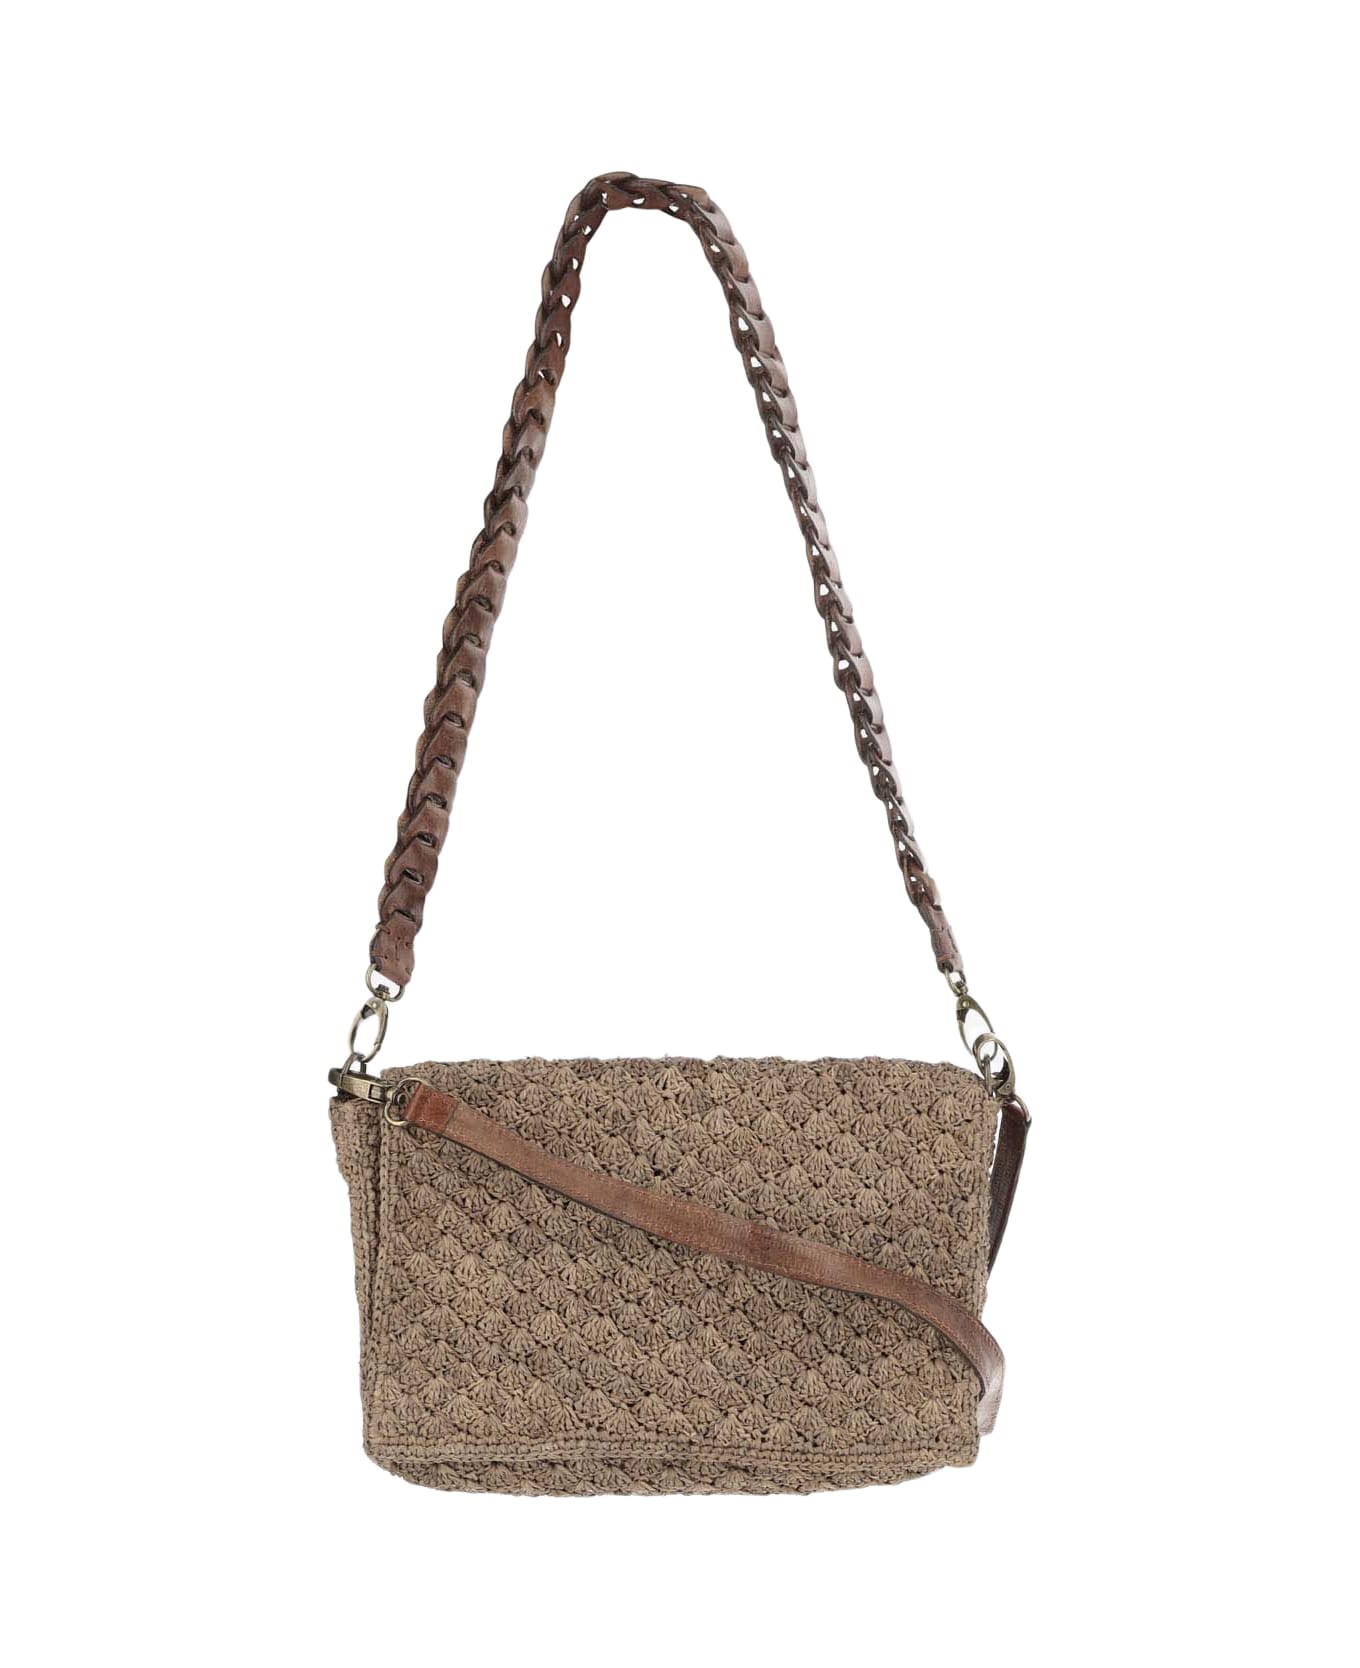 Ibeliv Sonia Bag In Raffia And Leather - Beige